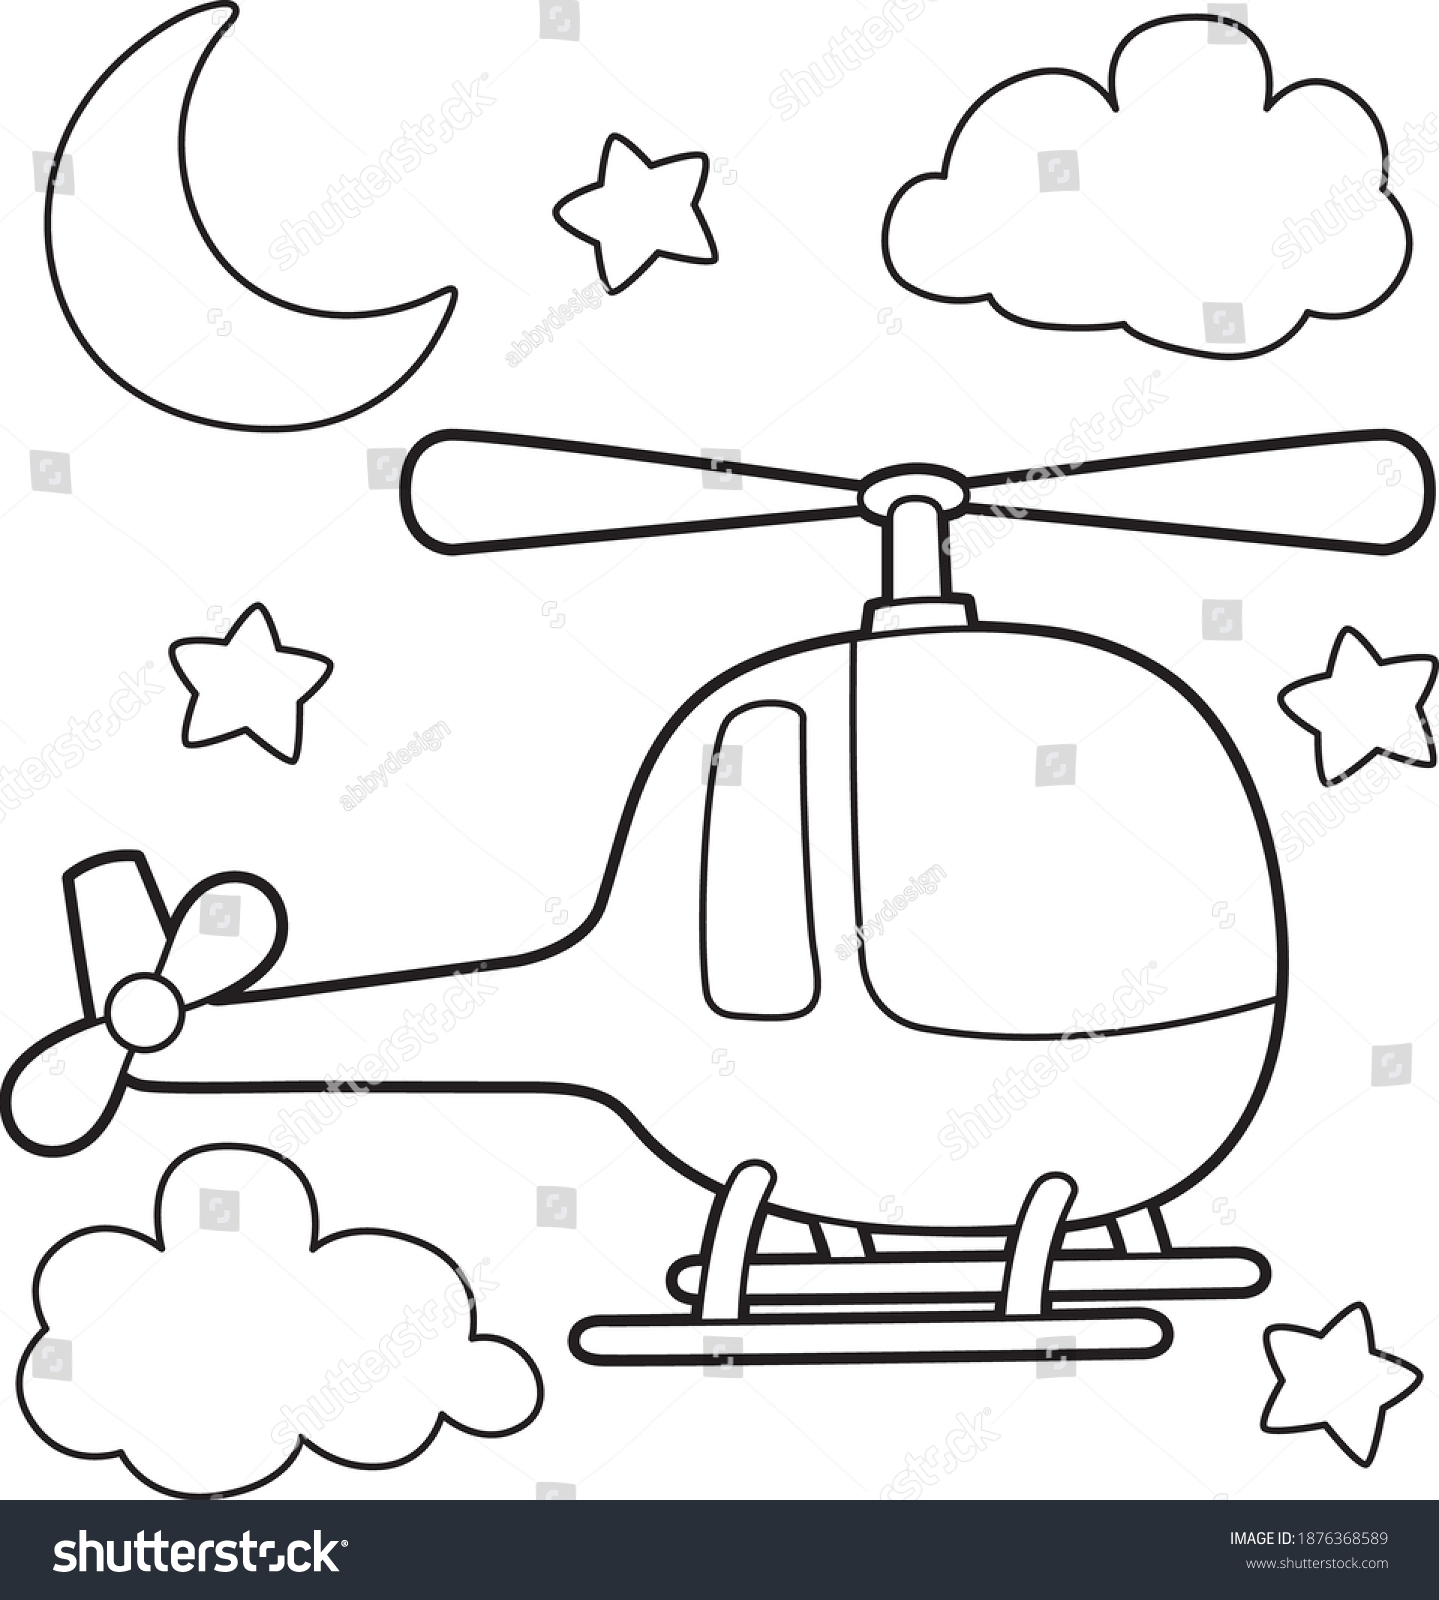 Cute Funny Coloring Page Helicopter Provides Stock Vector Royalty ...